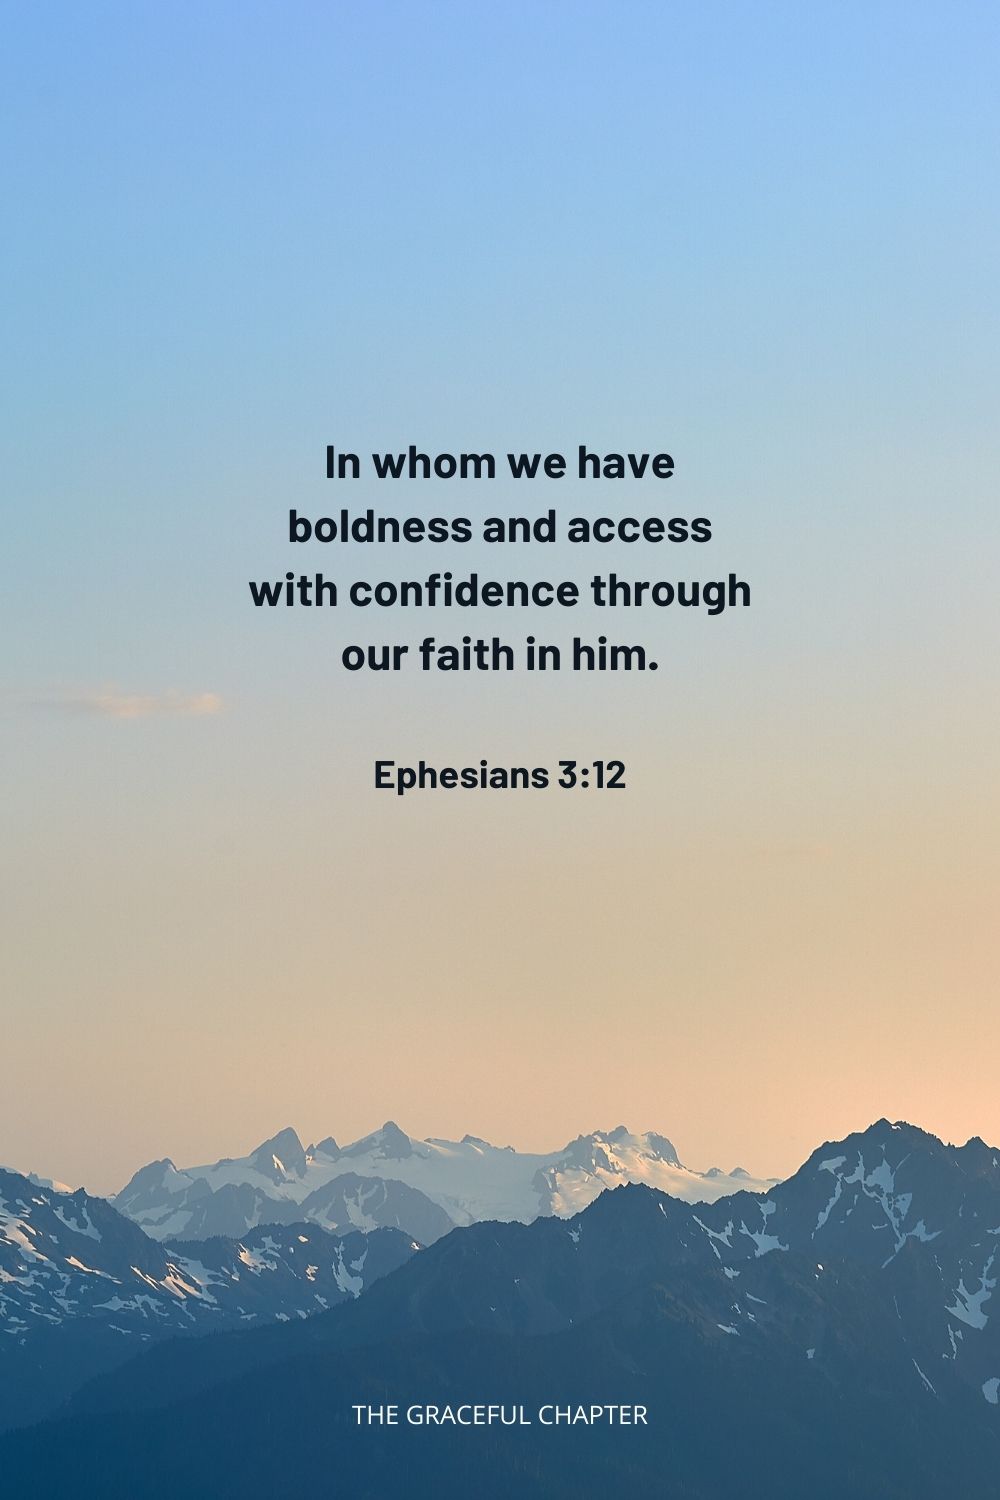  In whom we have boldness and access with confidence through our faith in him. Ephesians 3:12